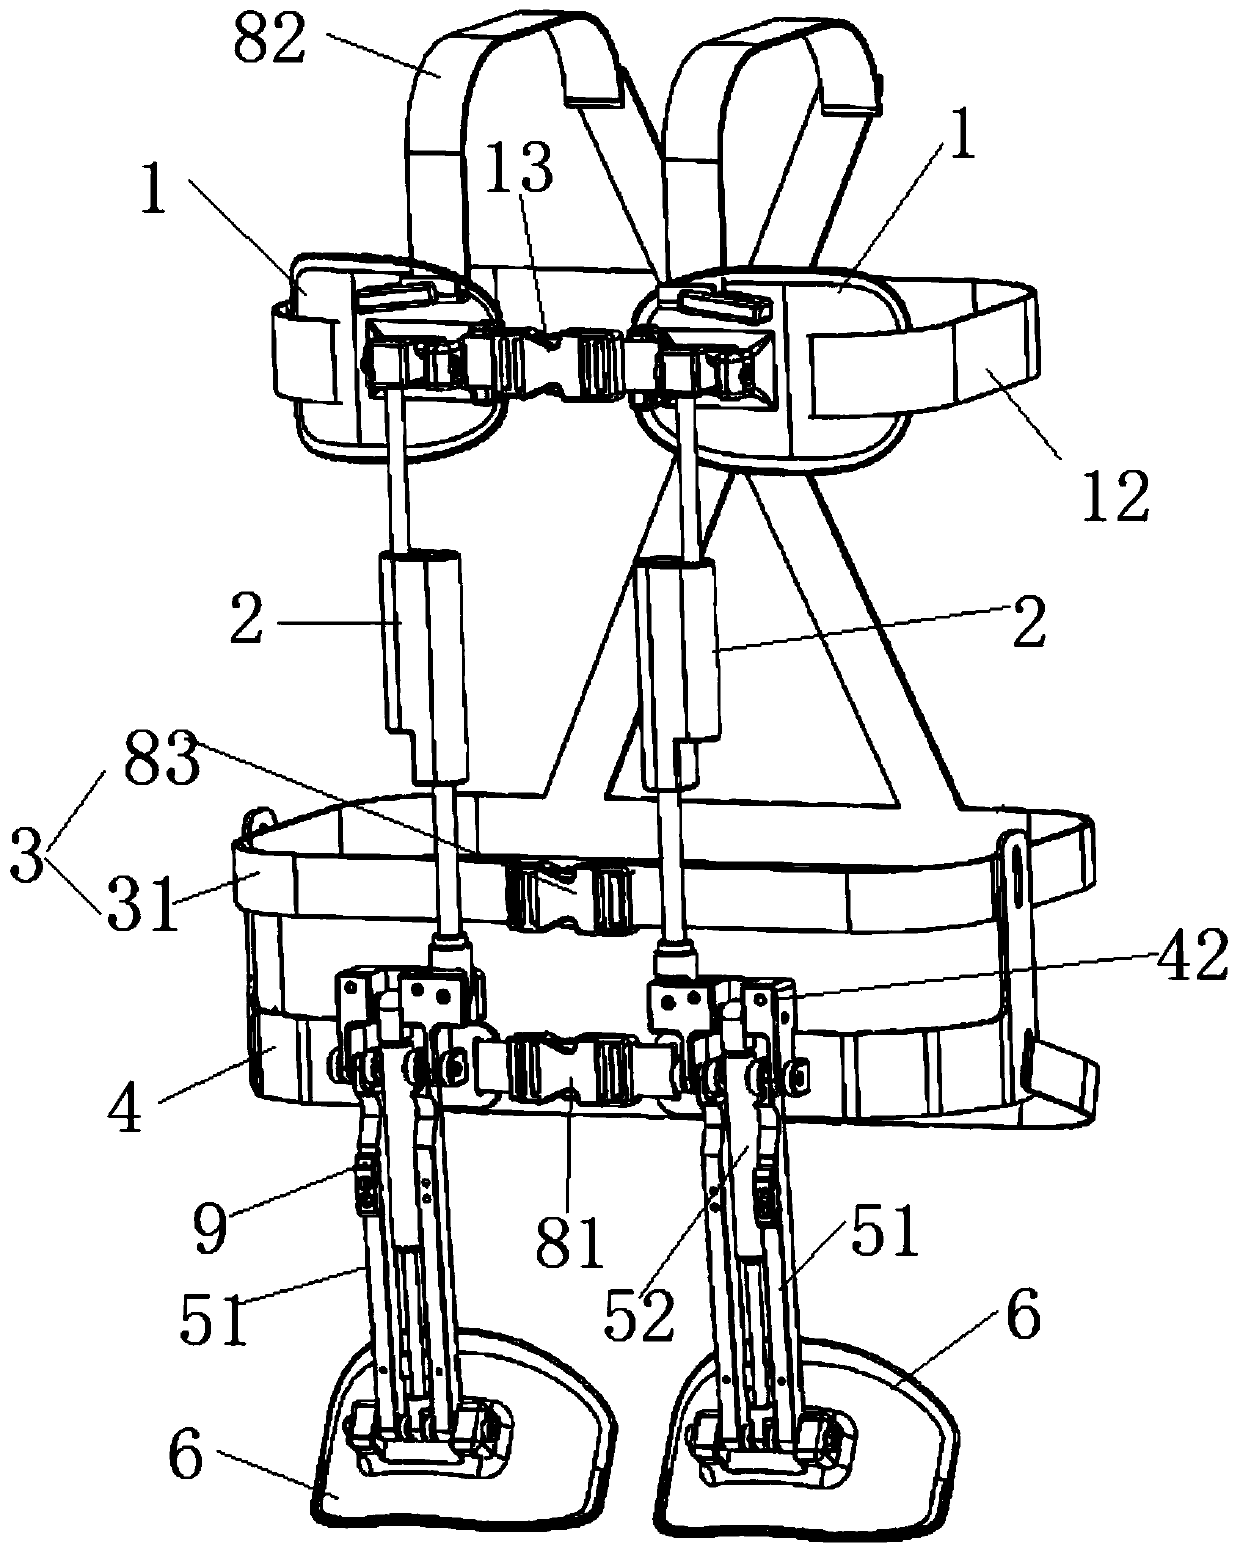 Power assisting device